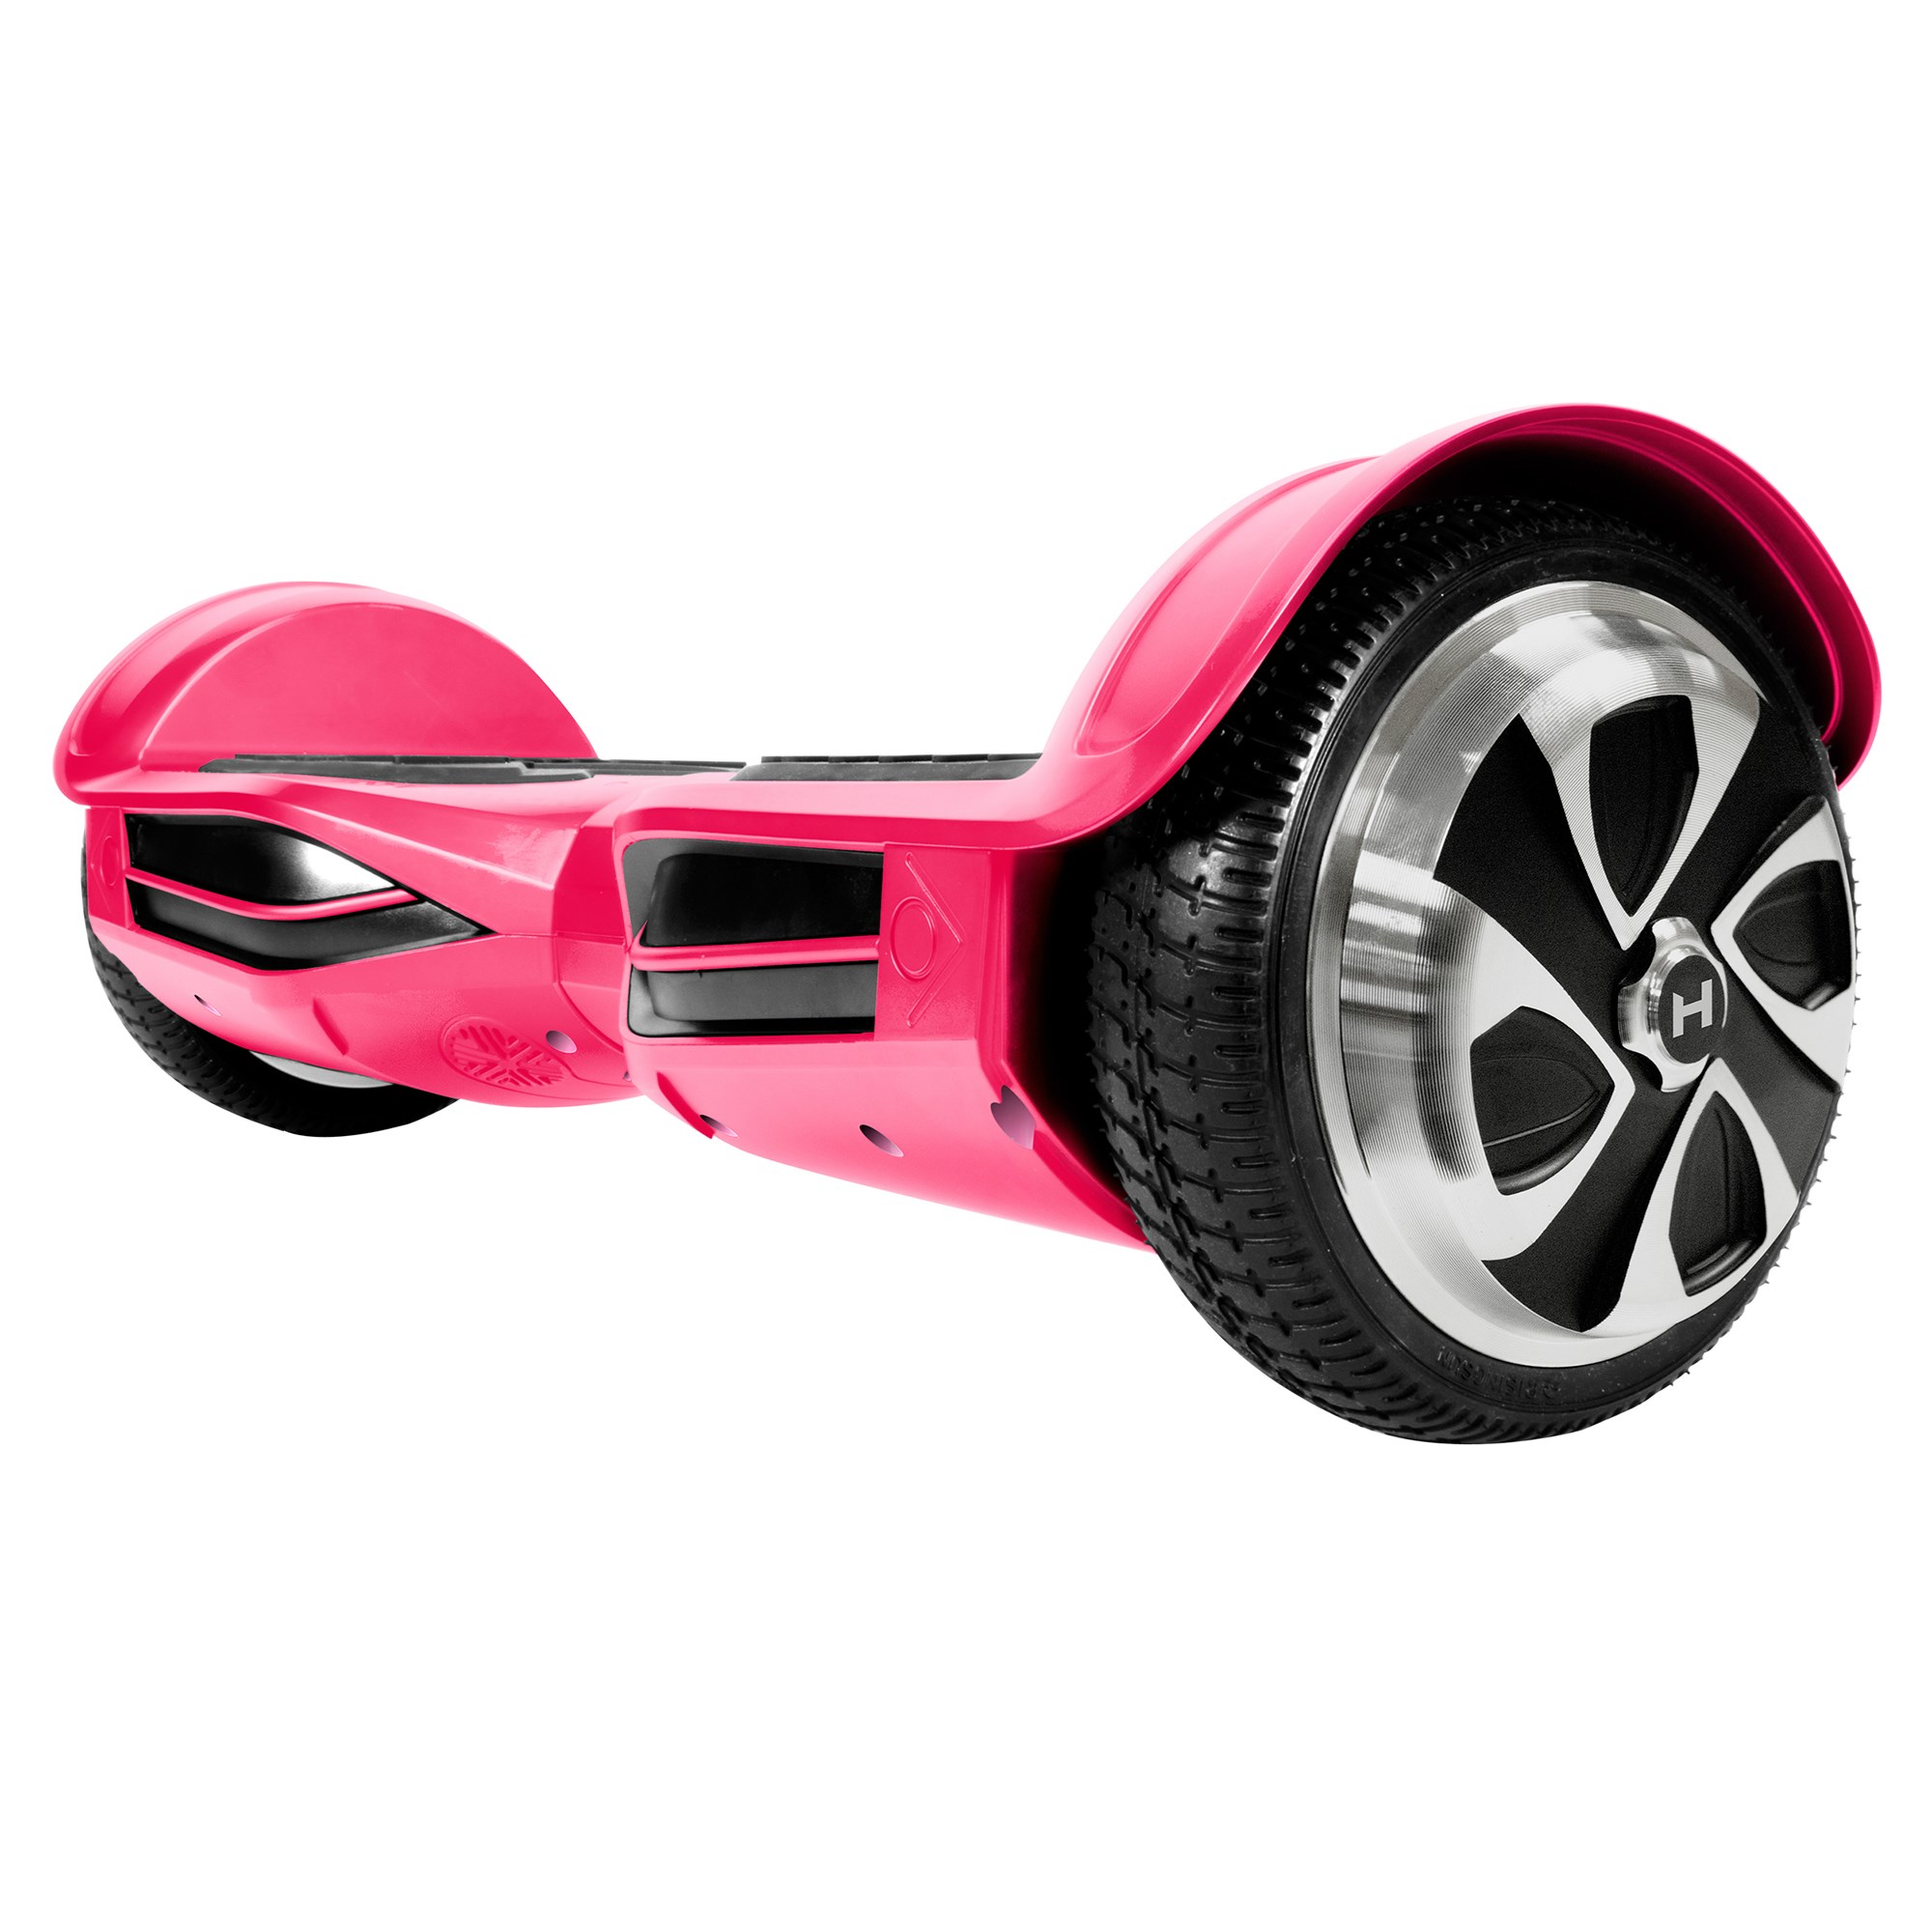 Hoverzone Hoverboard XLS - pink